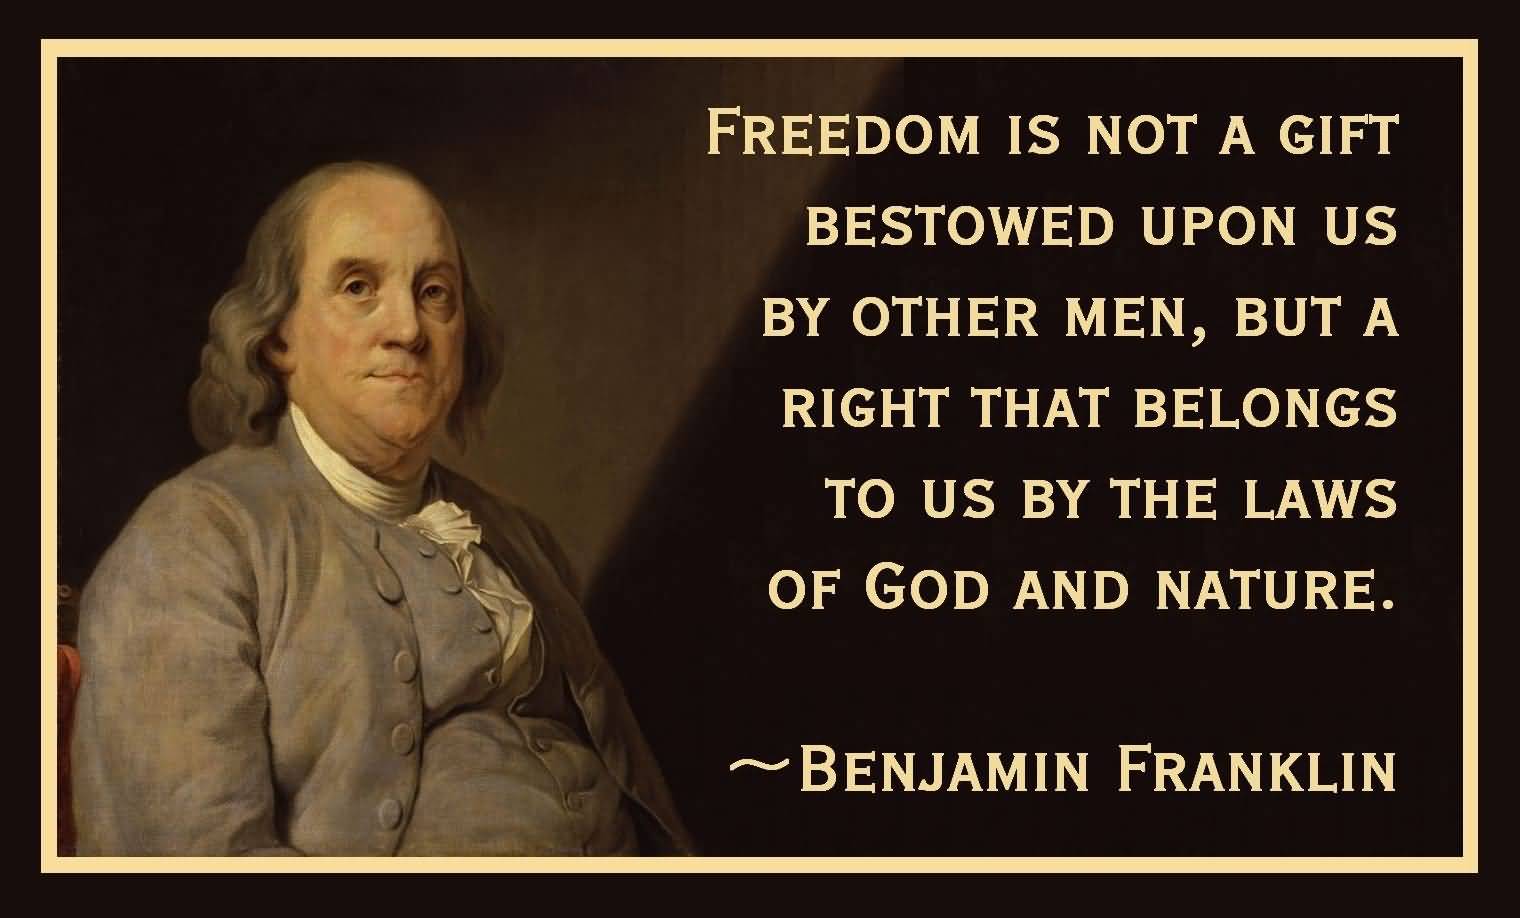 Freedom is not a gift bestowed upon us by other men, but a right that belongs to us by the laws of God and nature. Benjamin Franklin